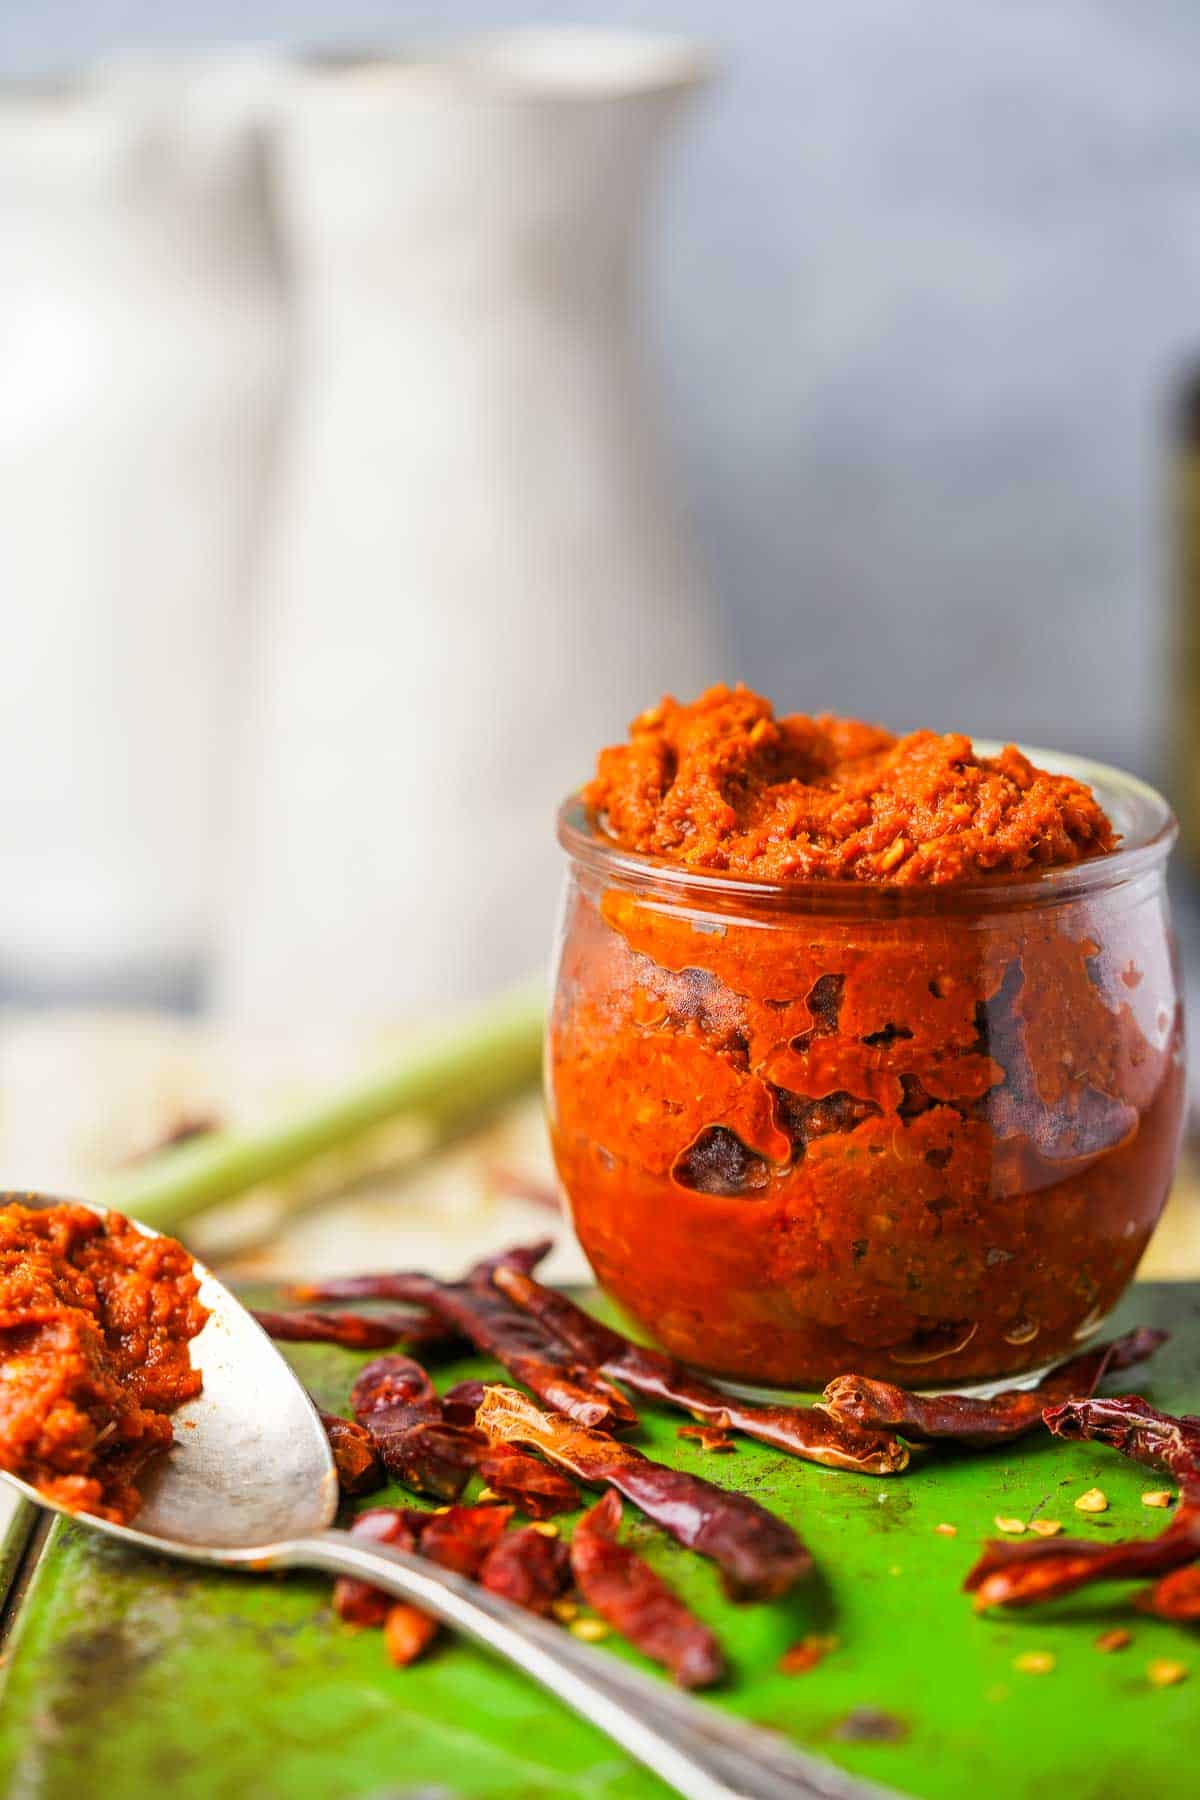 A bowl of red chili curry paste with a spoon.